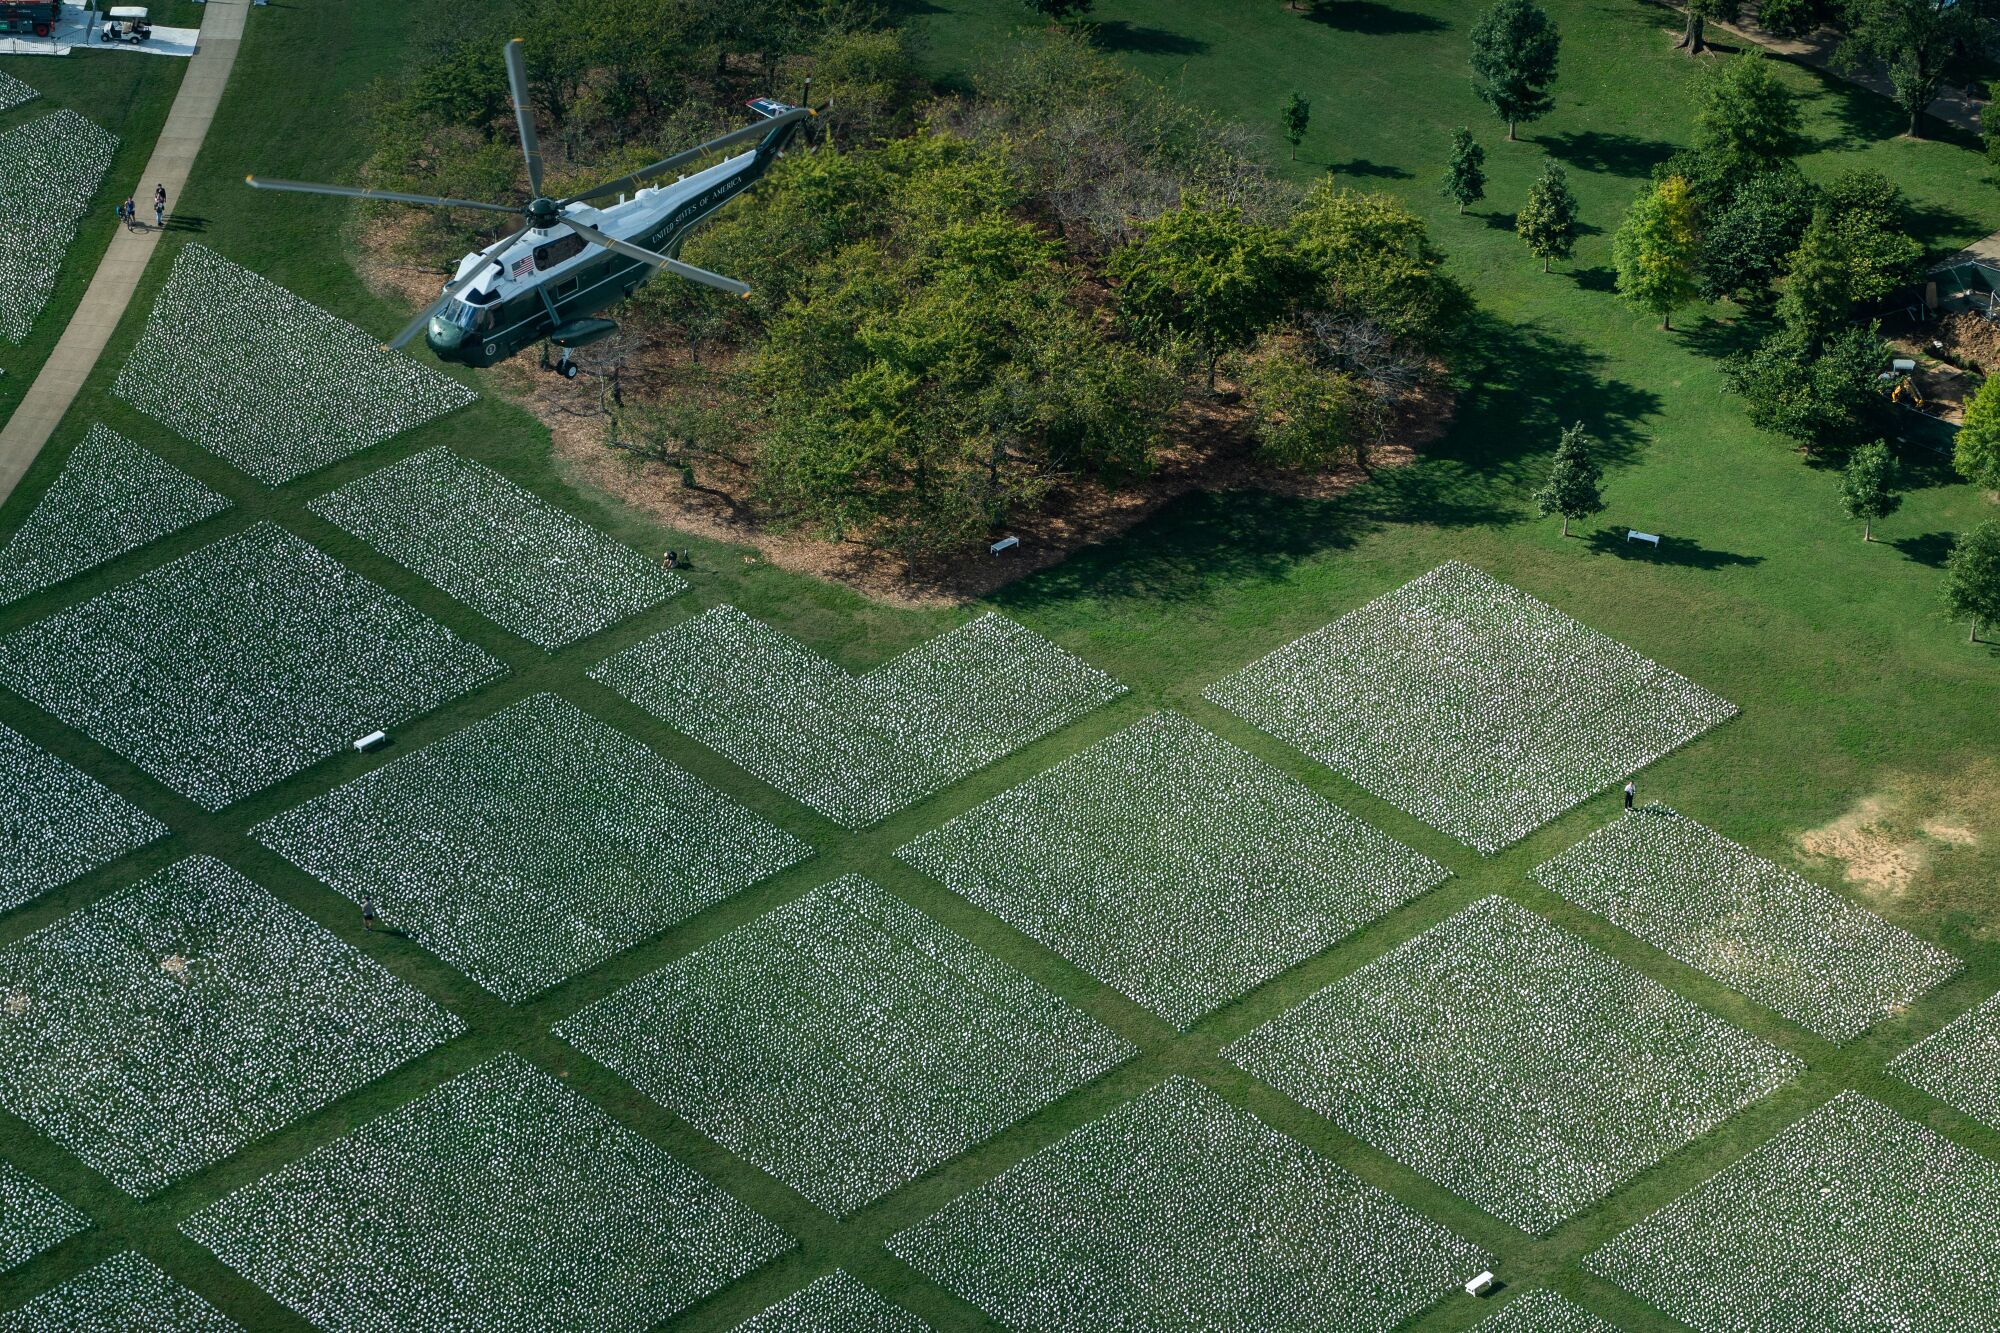 Helicopter flies over the National Mall, with grids of small white flags planted in the grass